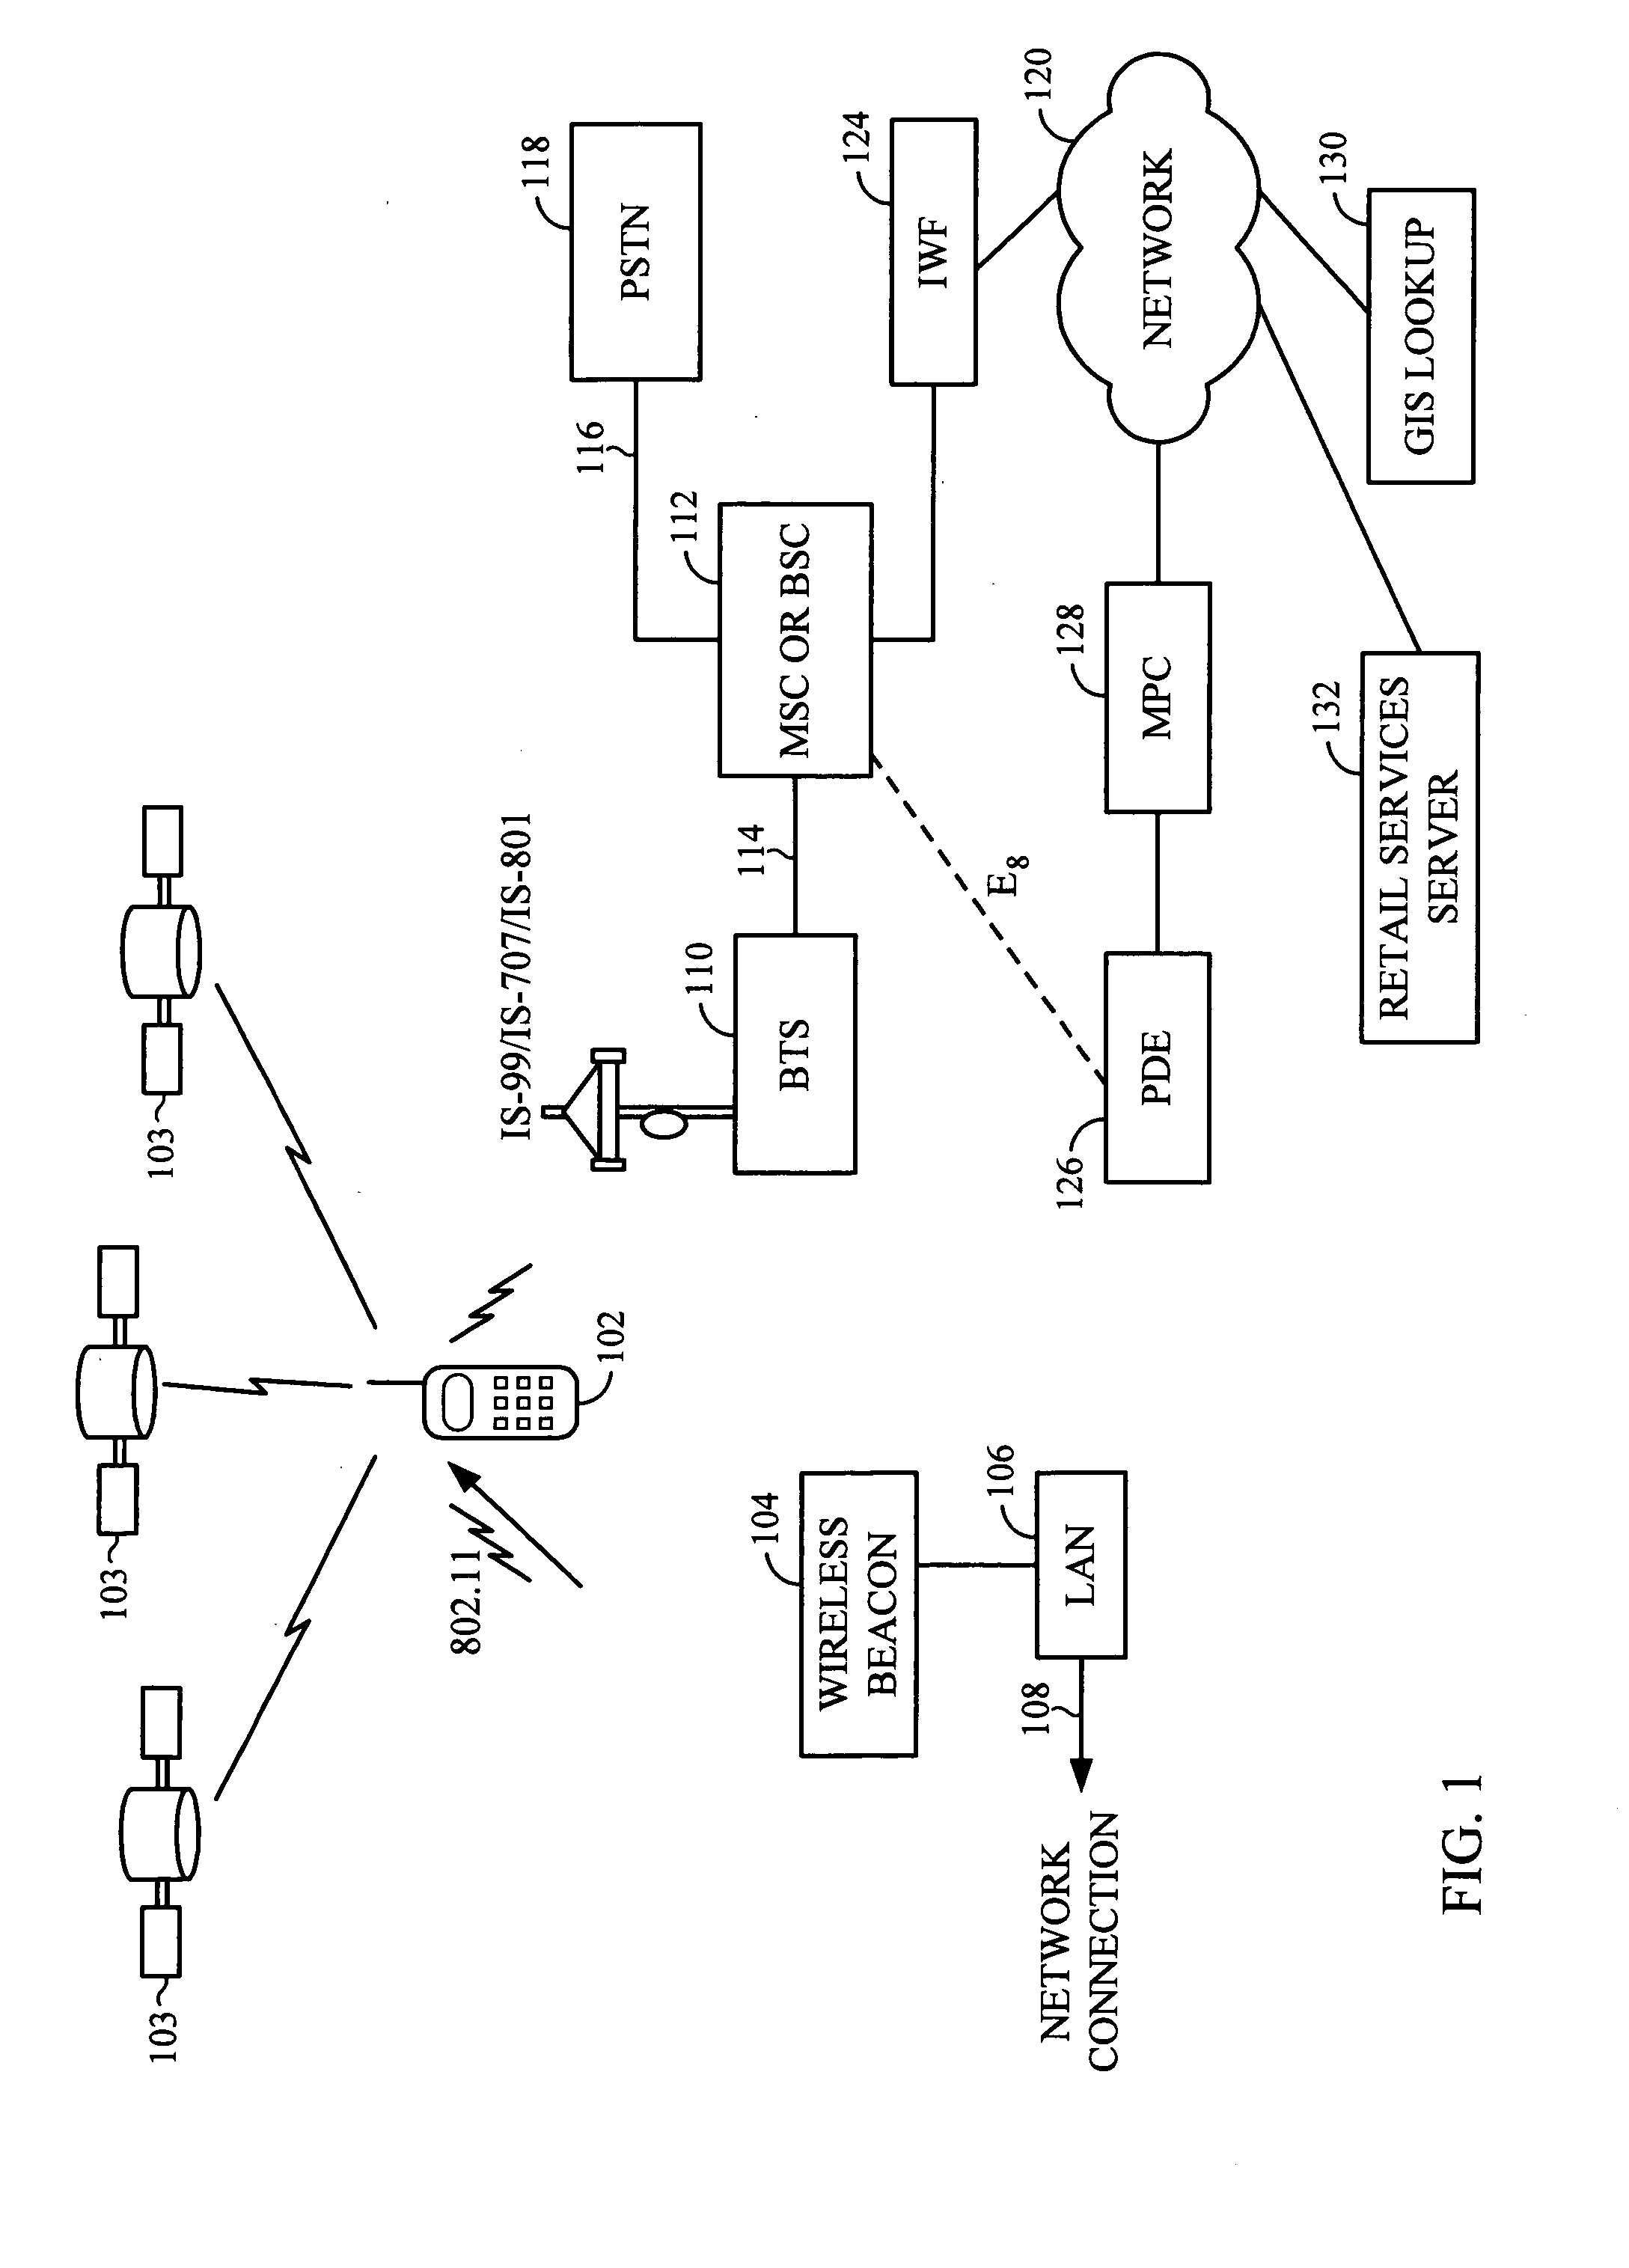 System and method for integration of wireless computer network in position determining technology